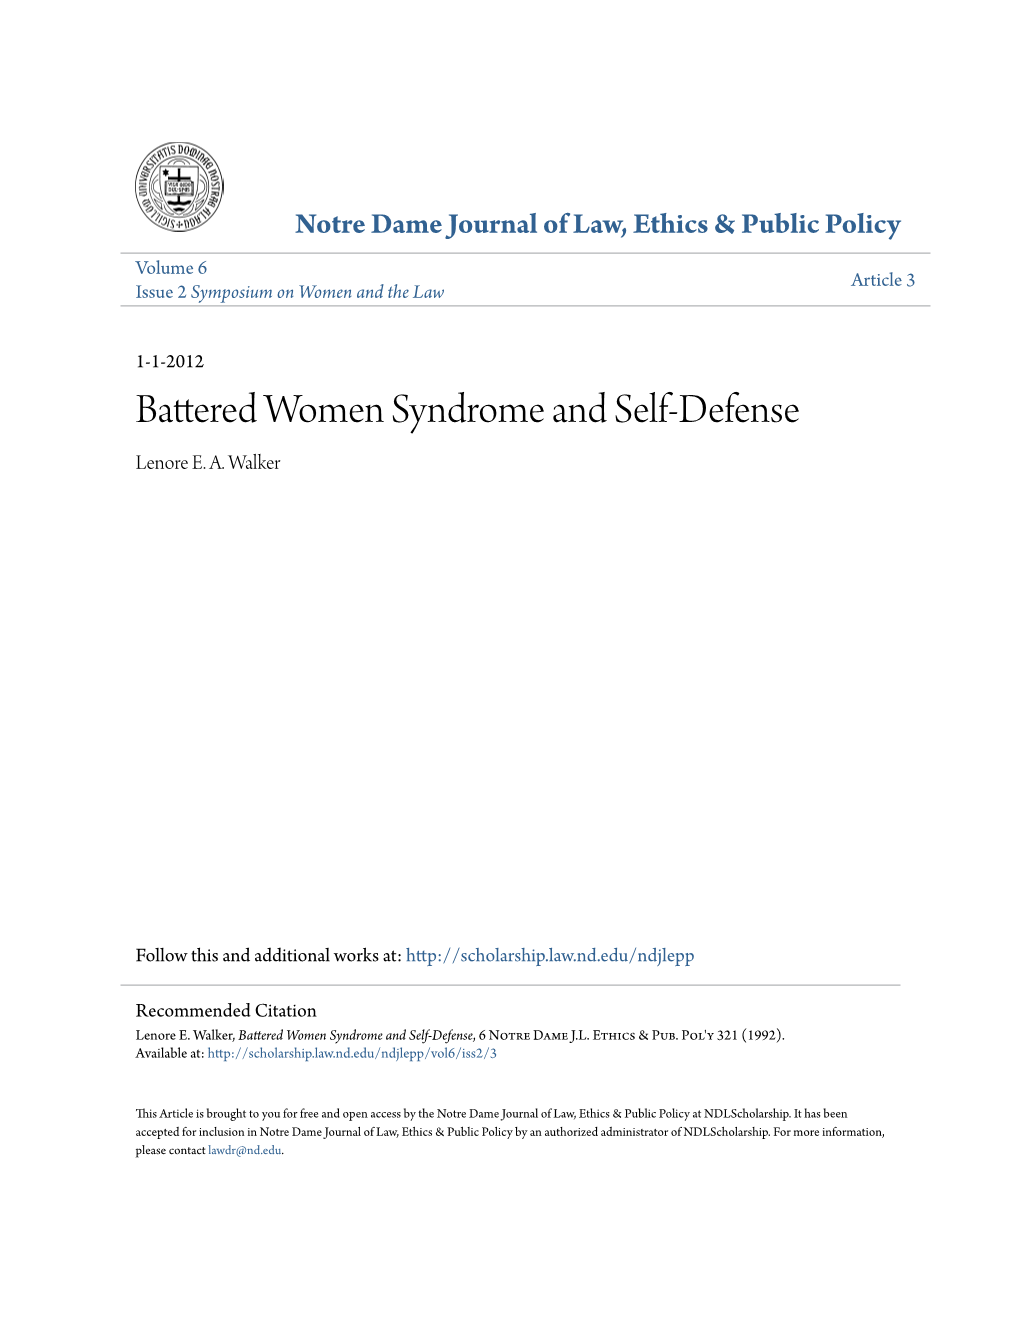 Battered Women Syndrome and Self-Defense Lenore E